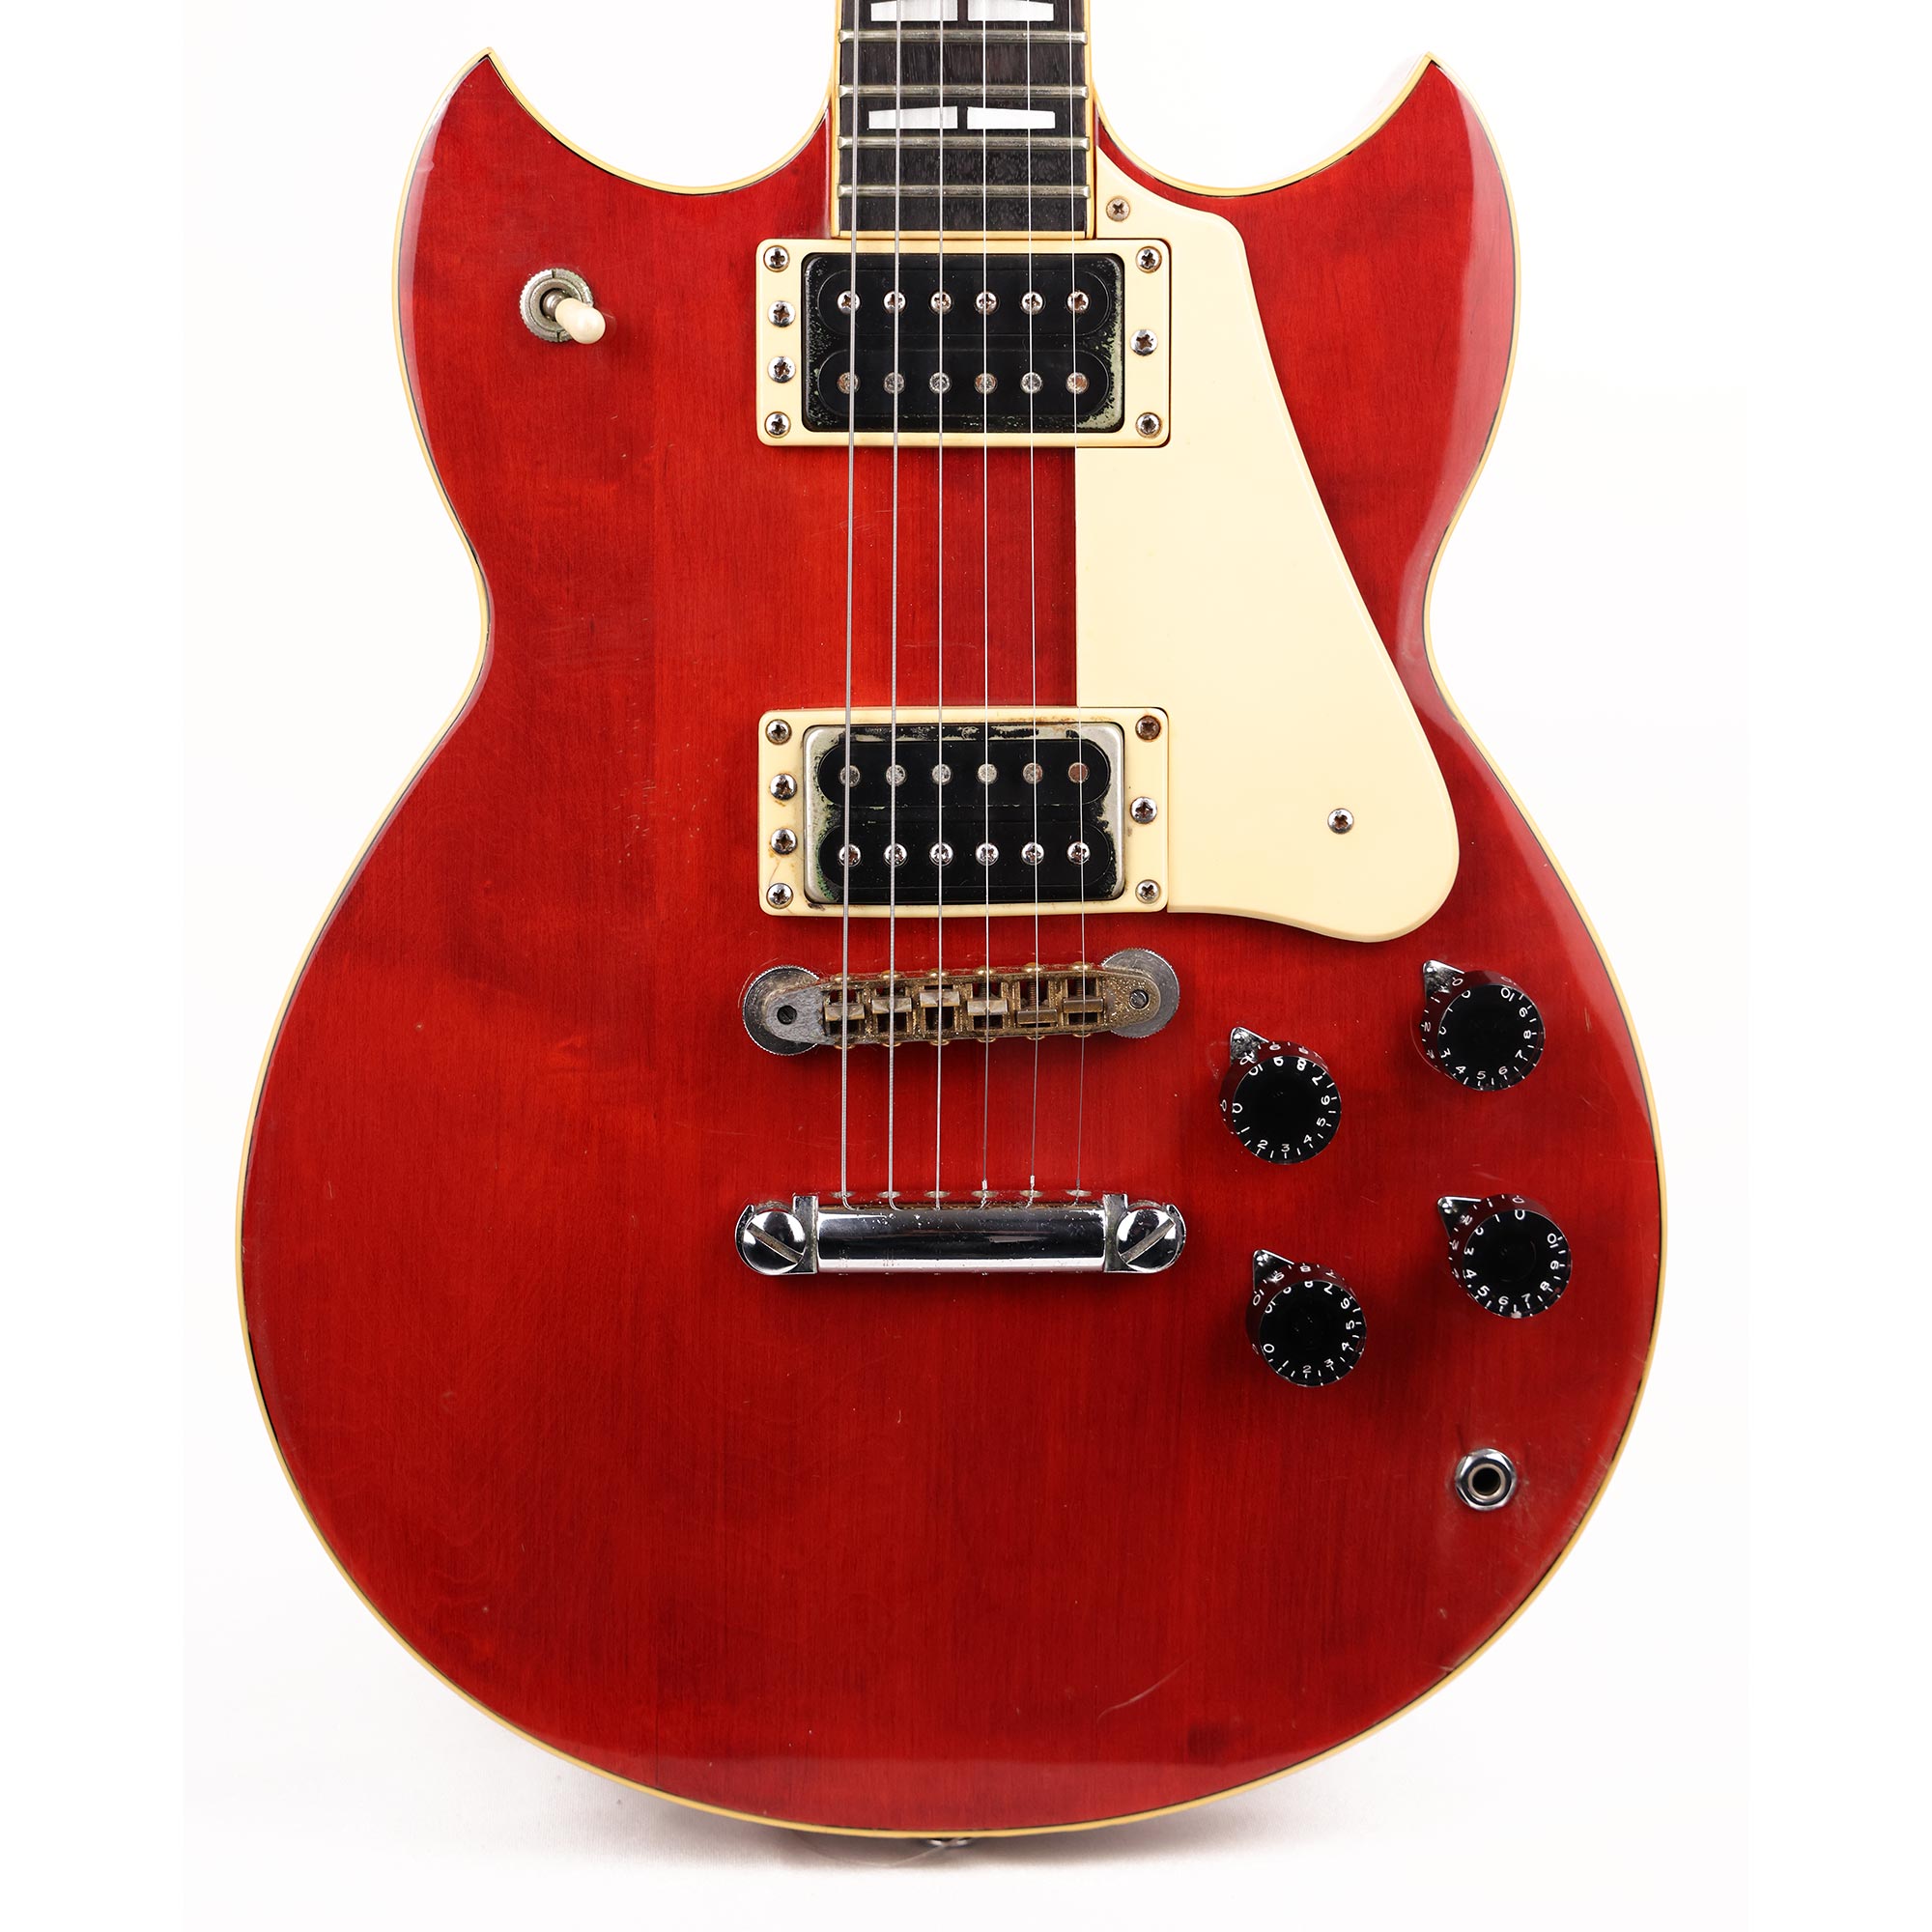 Yamaha SG-800 Persimmon Red | The Music Zoo